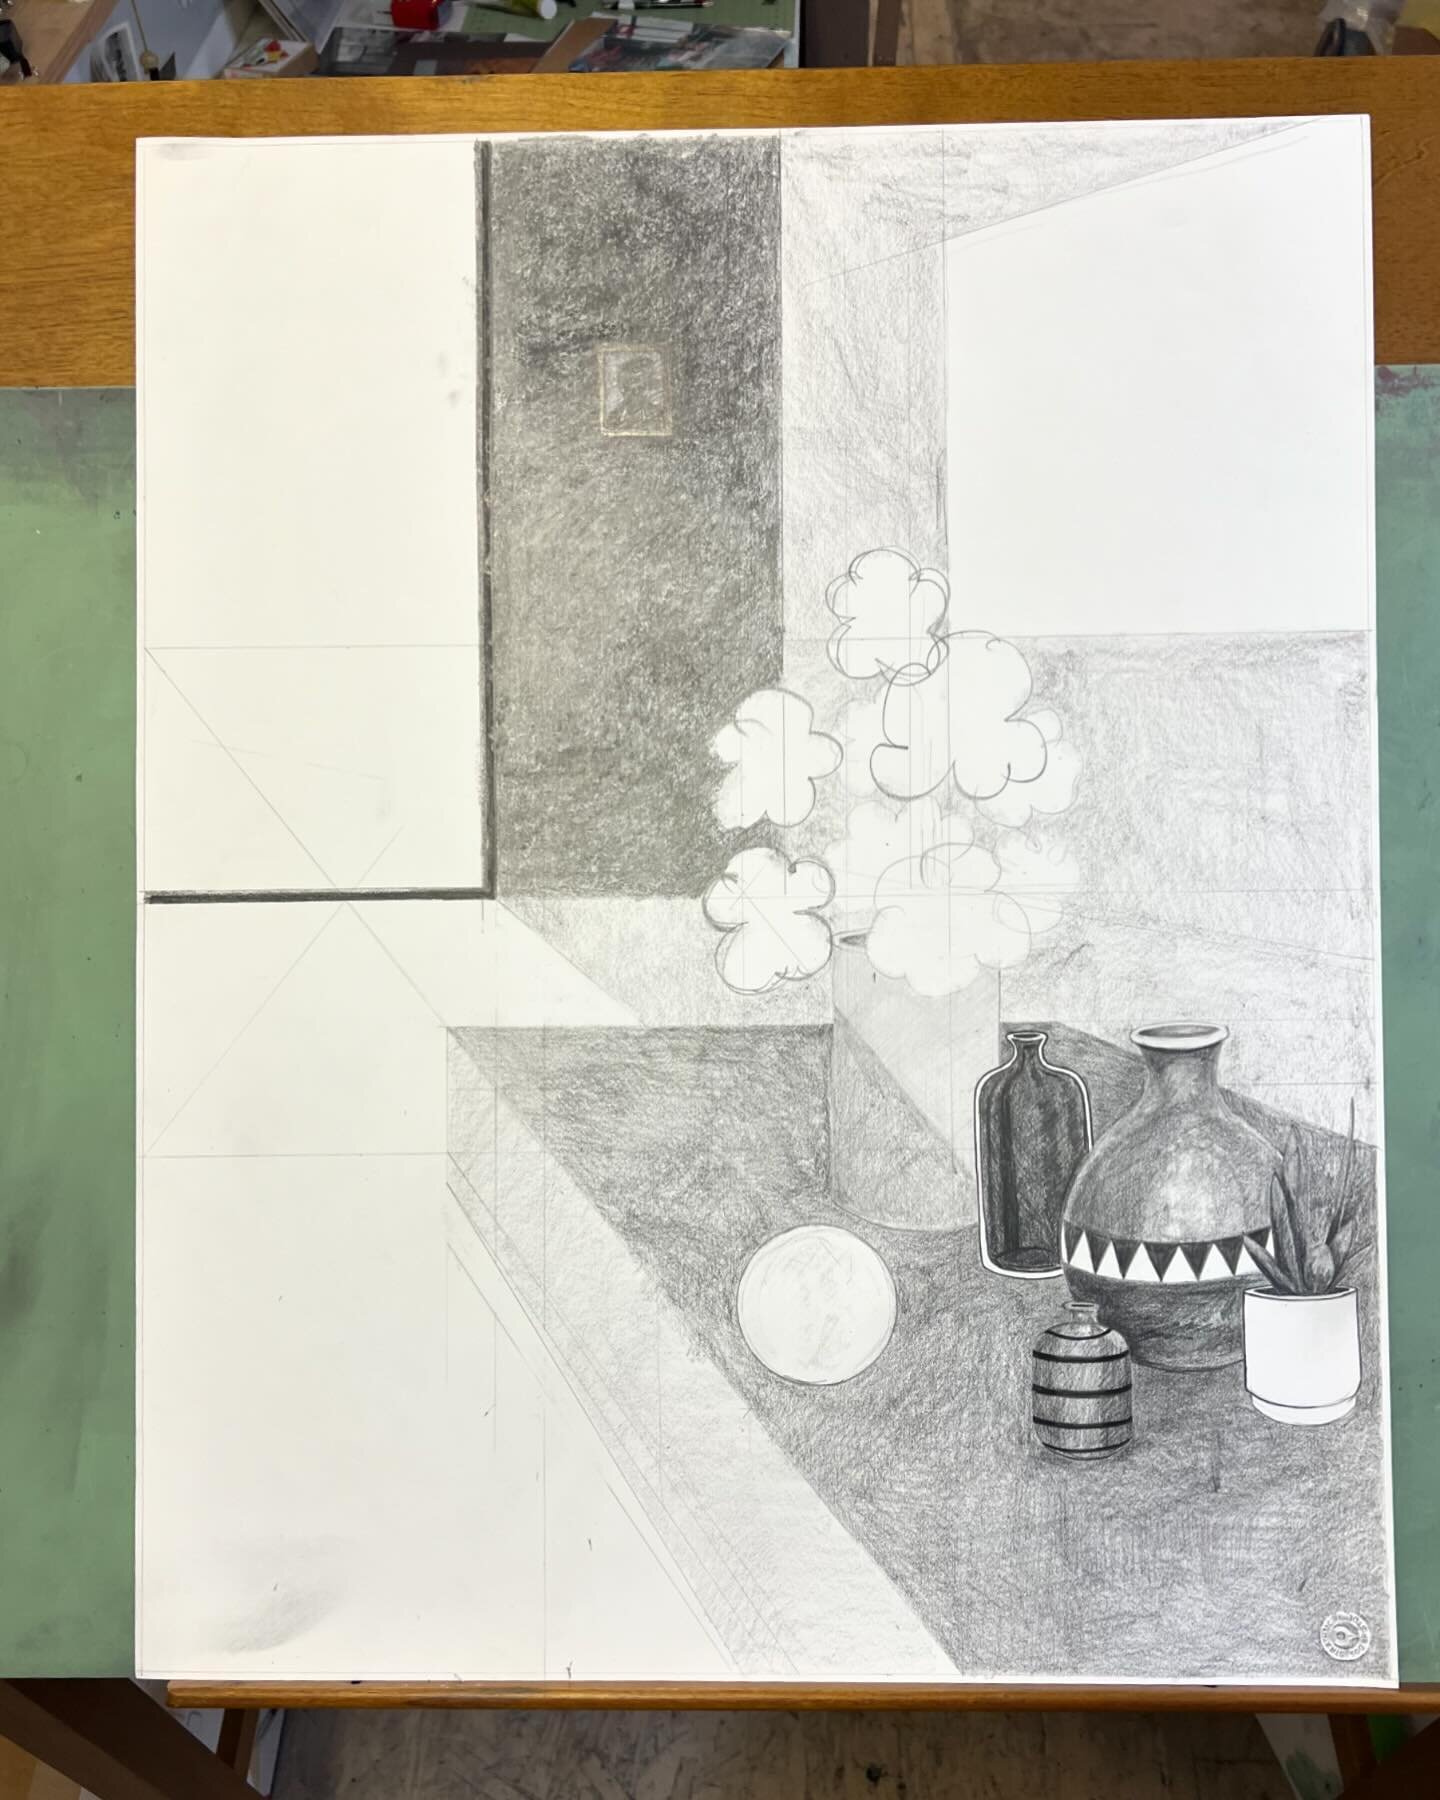 A little bit of movement on this drawing. #wip #drawing #stilllife